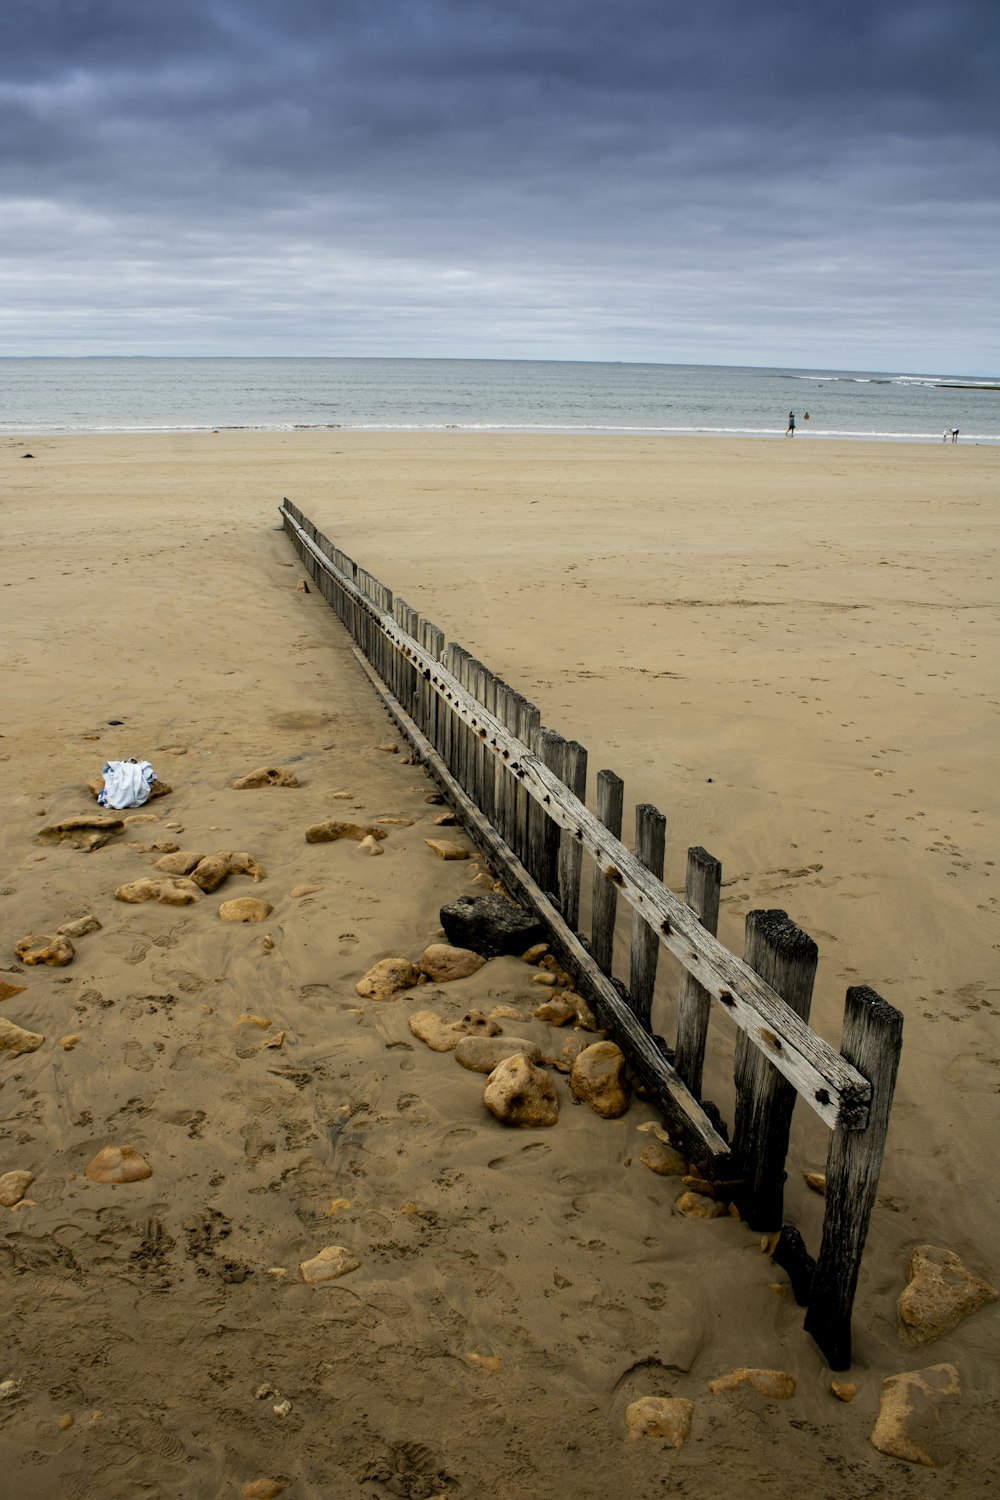 a broken fence on a beach with a body of water in the background